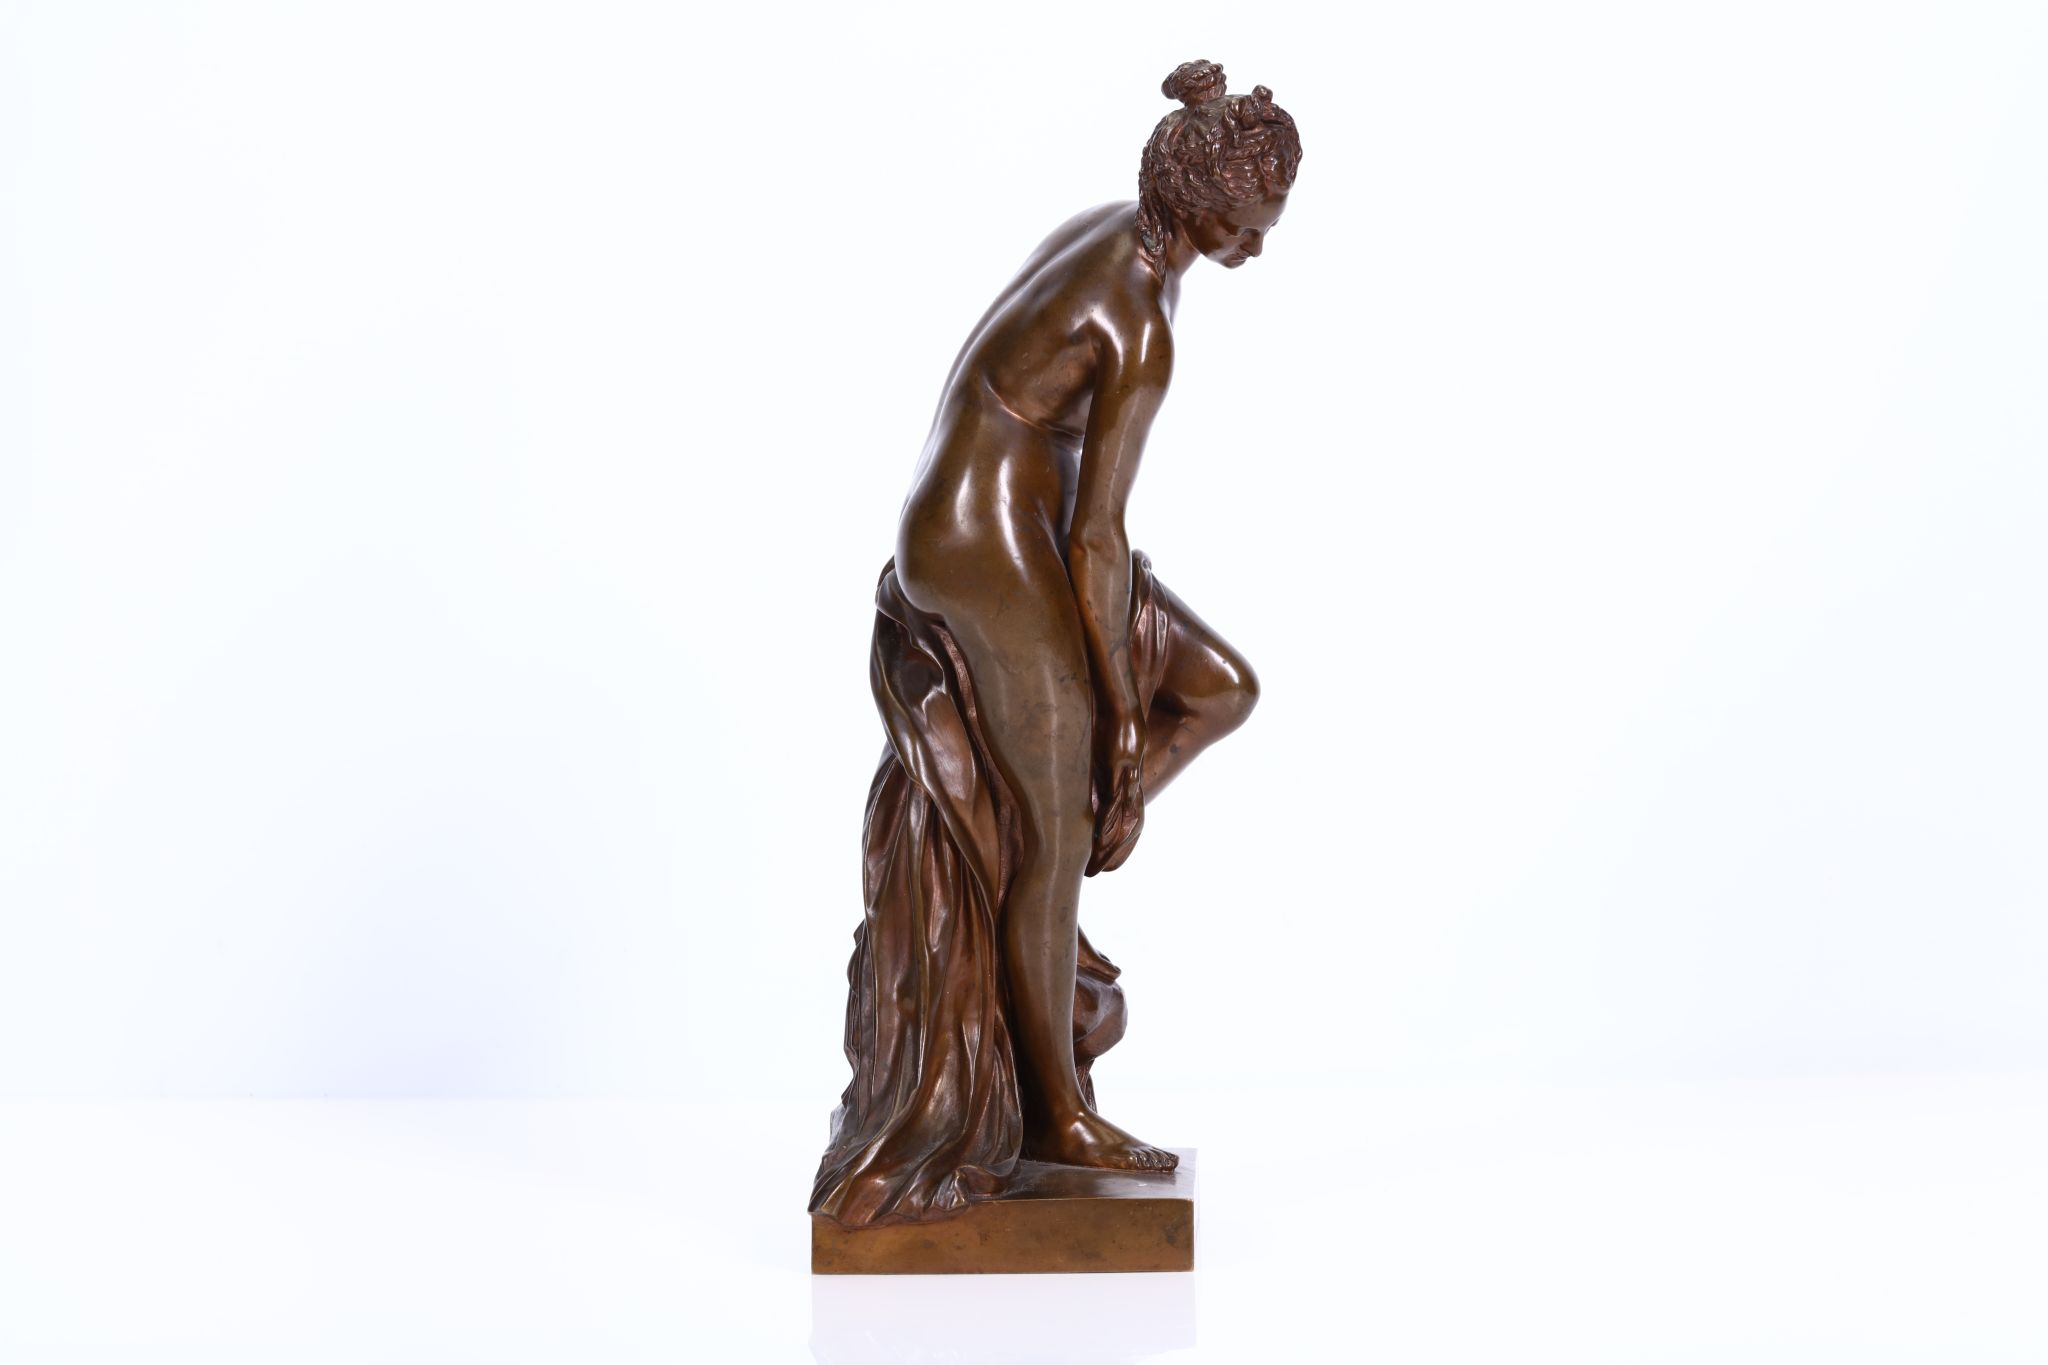 AFTER CHRISTOPHE GABRIEL ALLEGRAIN (FRENCH, 1710-1795): A LATE 19TH CENTURY FRENCH BRONZE FIGURE - Image 4 of 8